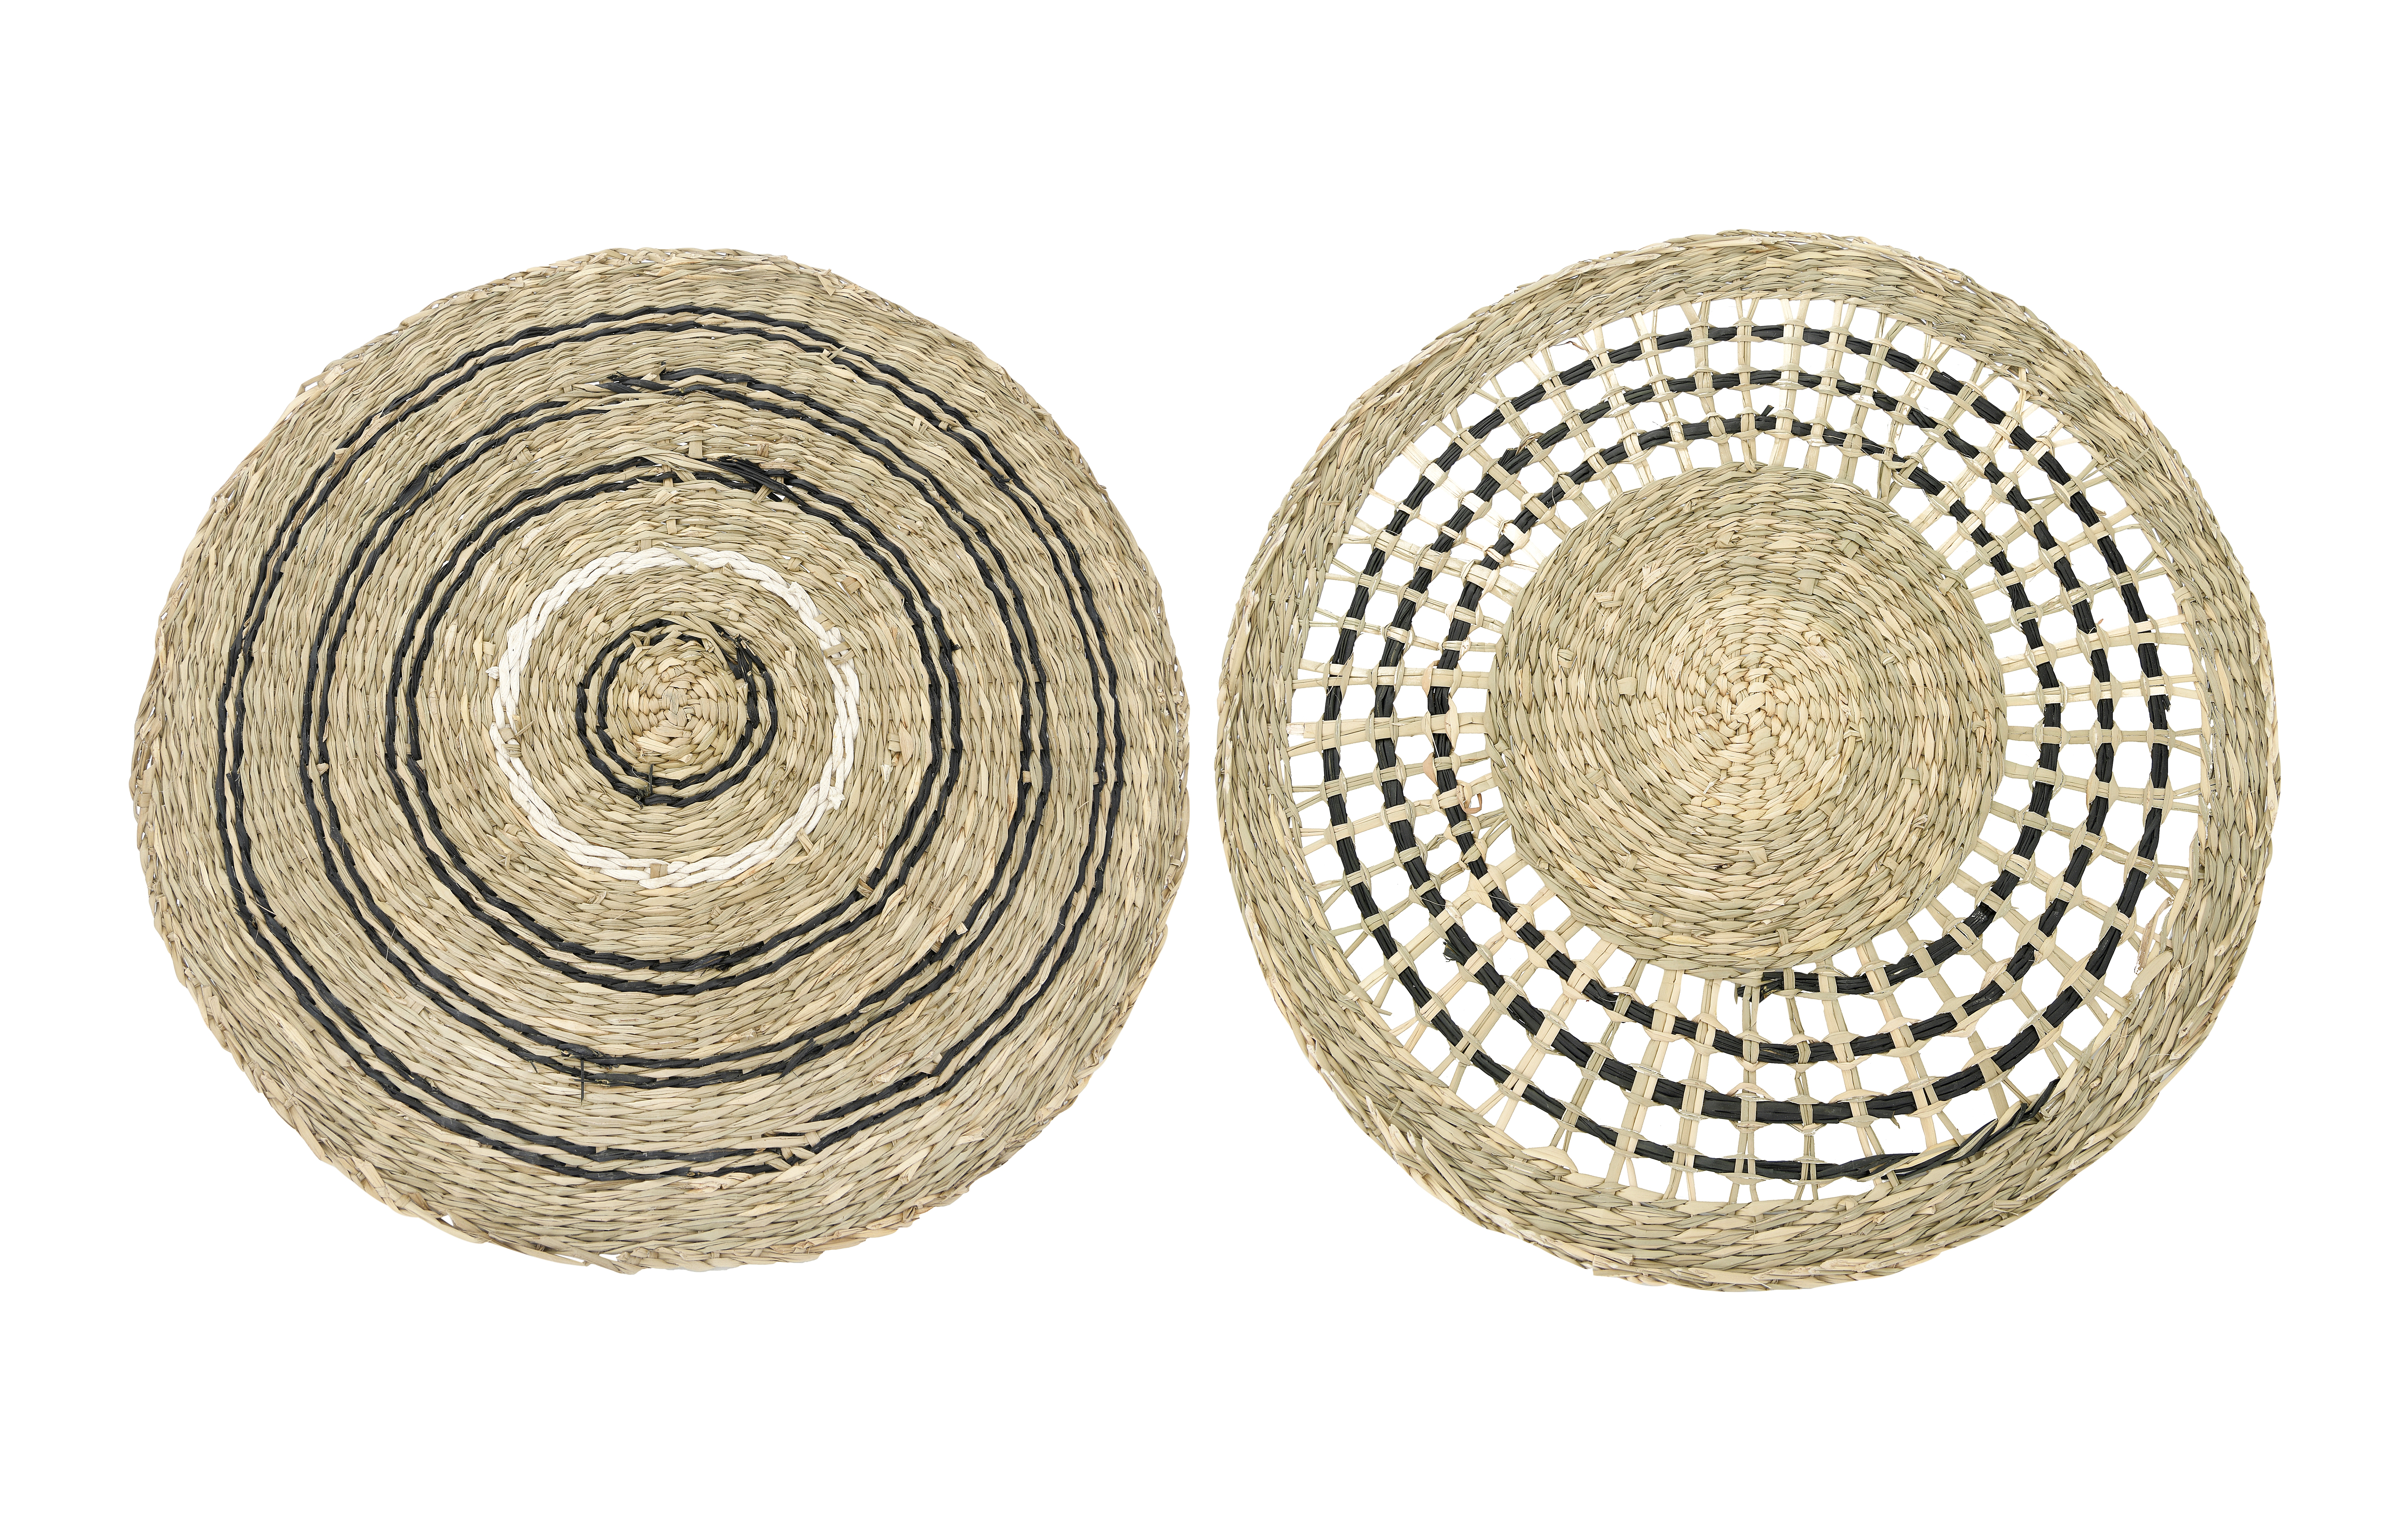 Handwoven Seagrass Placemat, Black & Natural, Set of 2 - Nomad Home